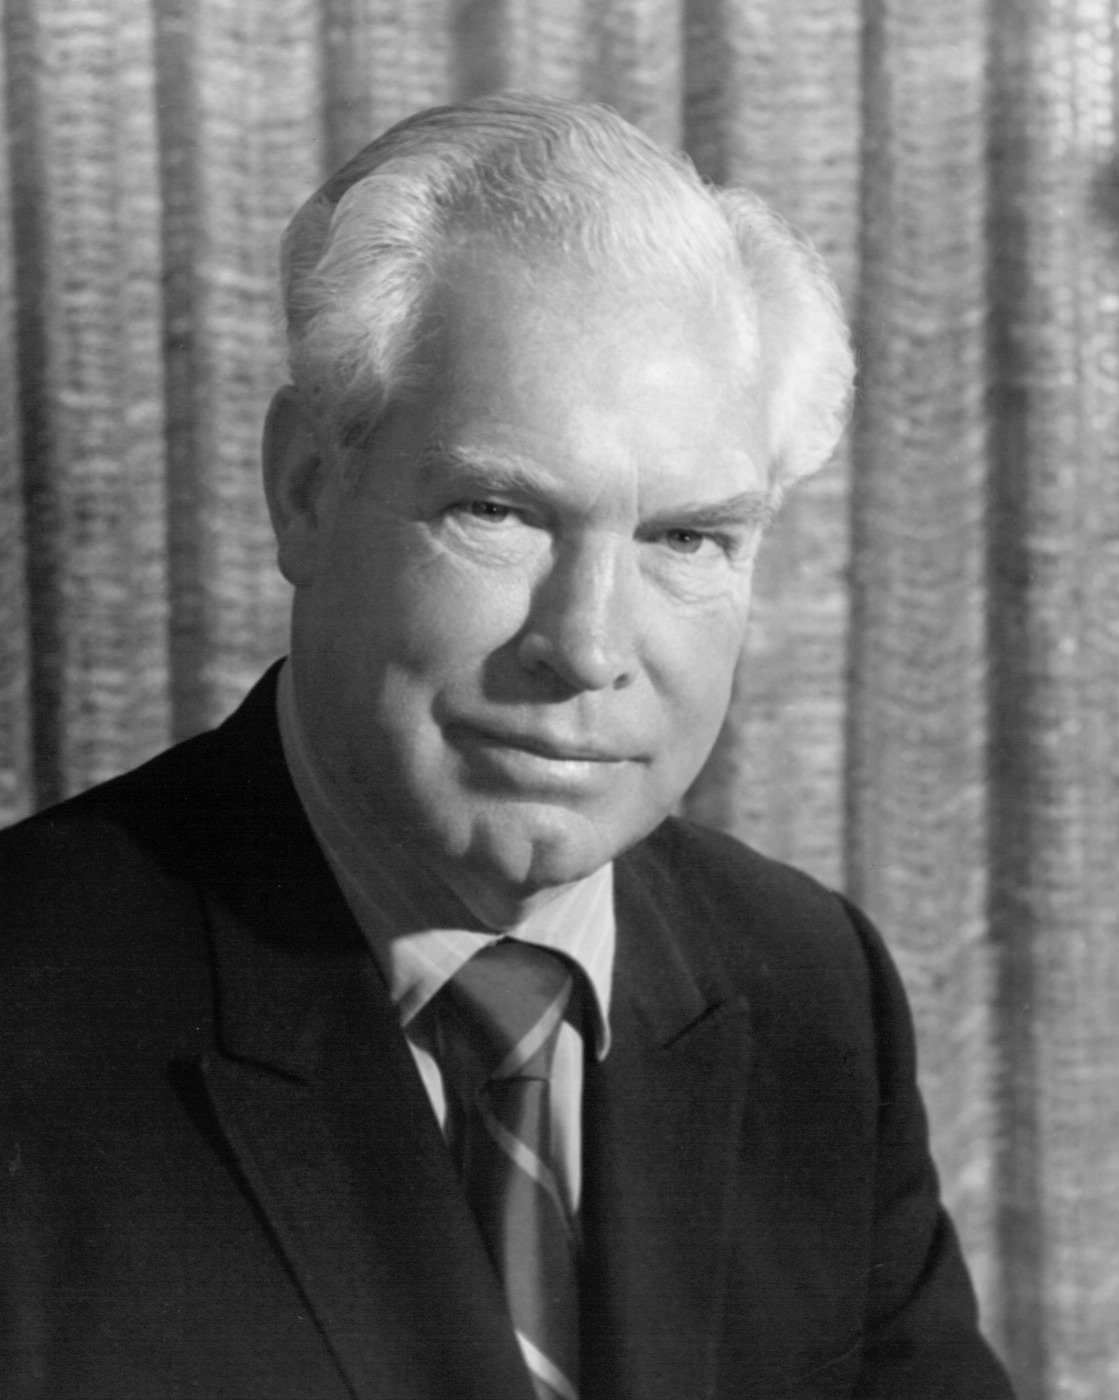 William Hanna, the co-founder of Hanna-Barber who also provided the voice for Tom for many years